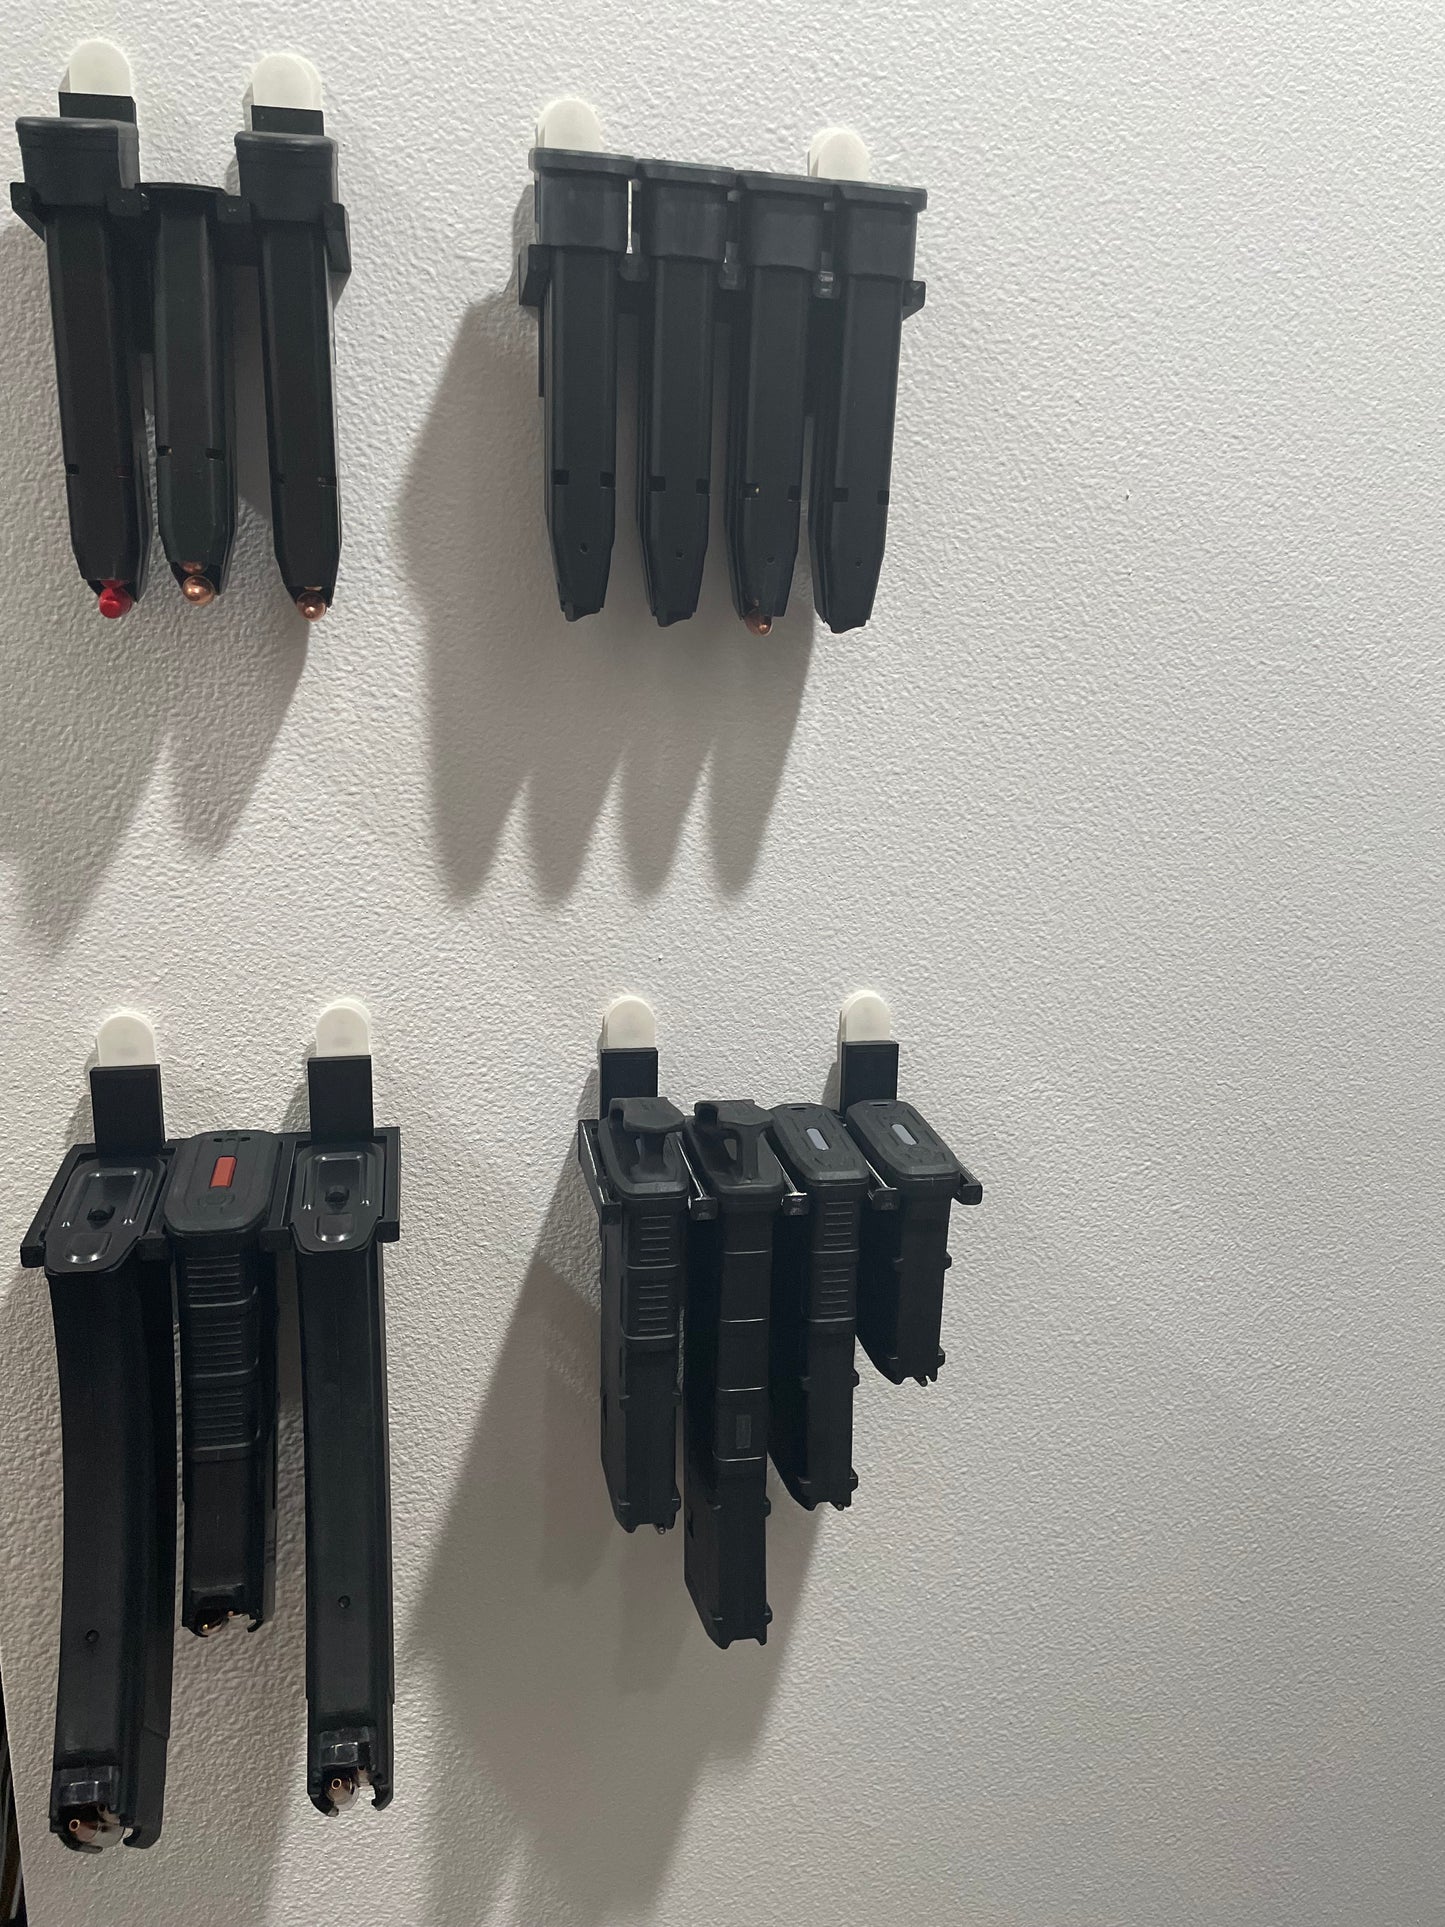 Mount for Sig P226 Mags - Command Strips | Magazine Holder Storage Rack